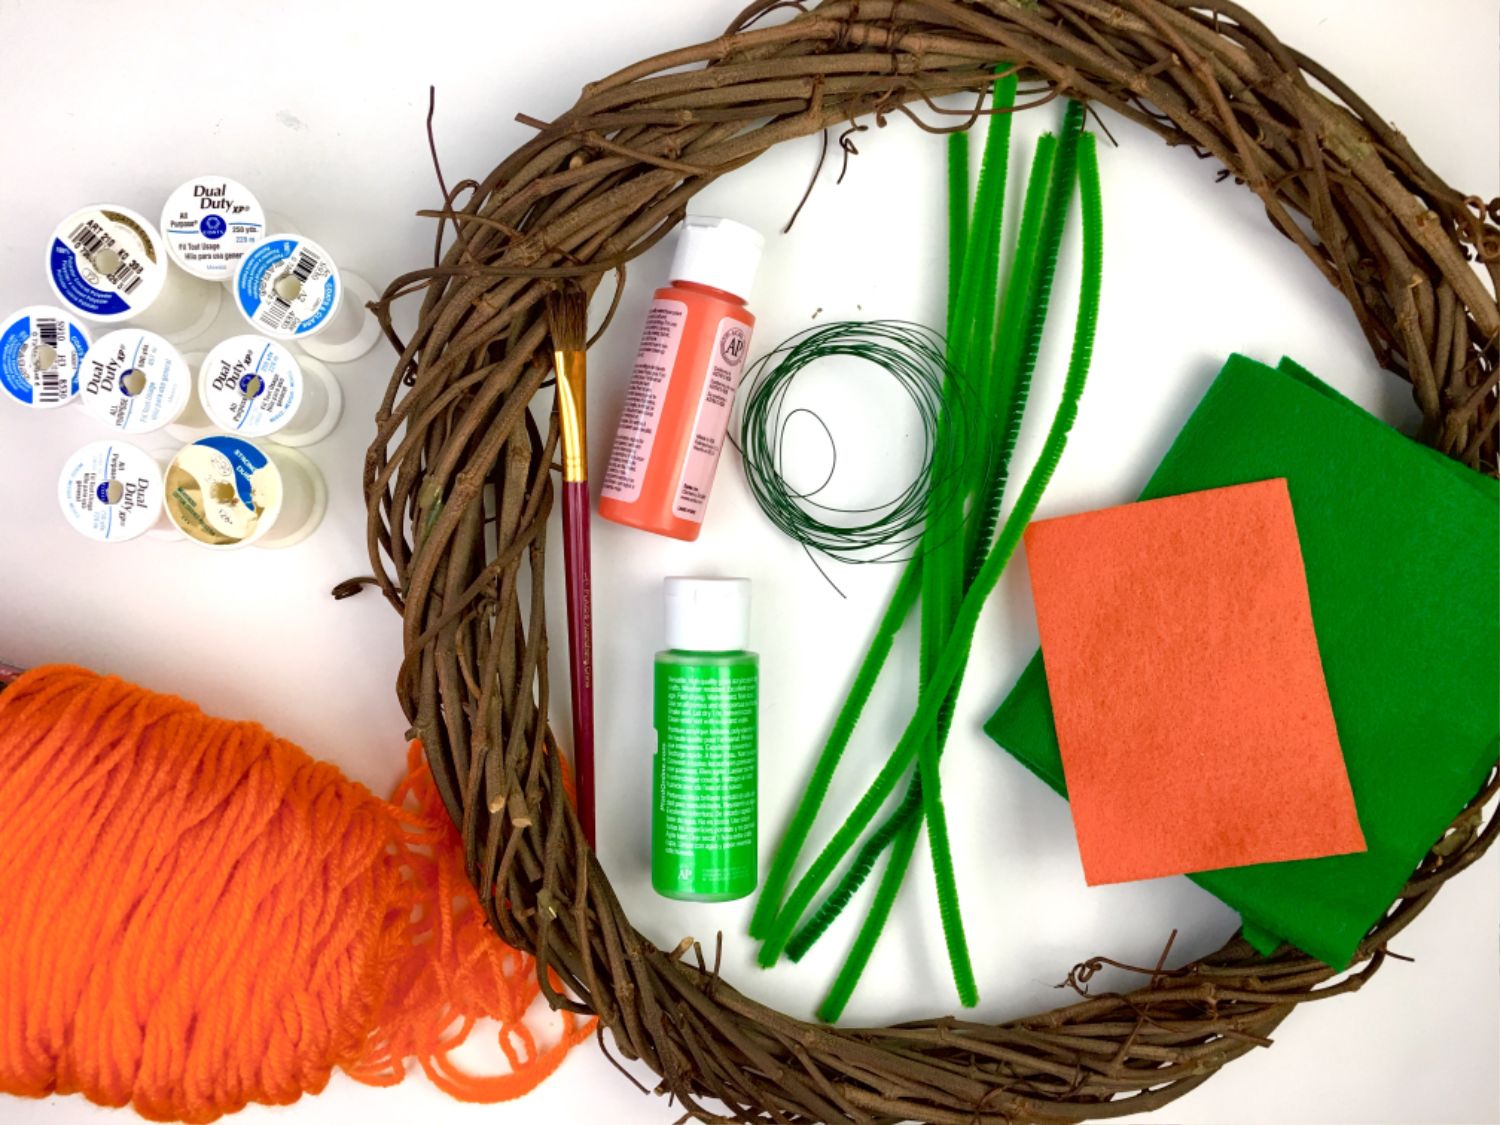 Baby Carrot Wreath Tutorial for Spring